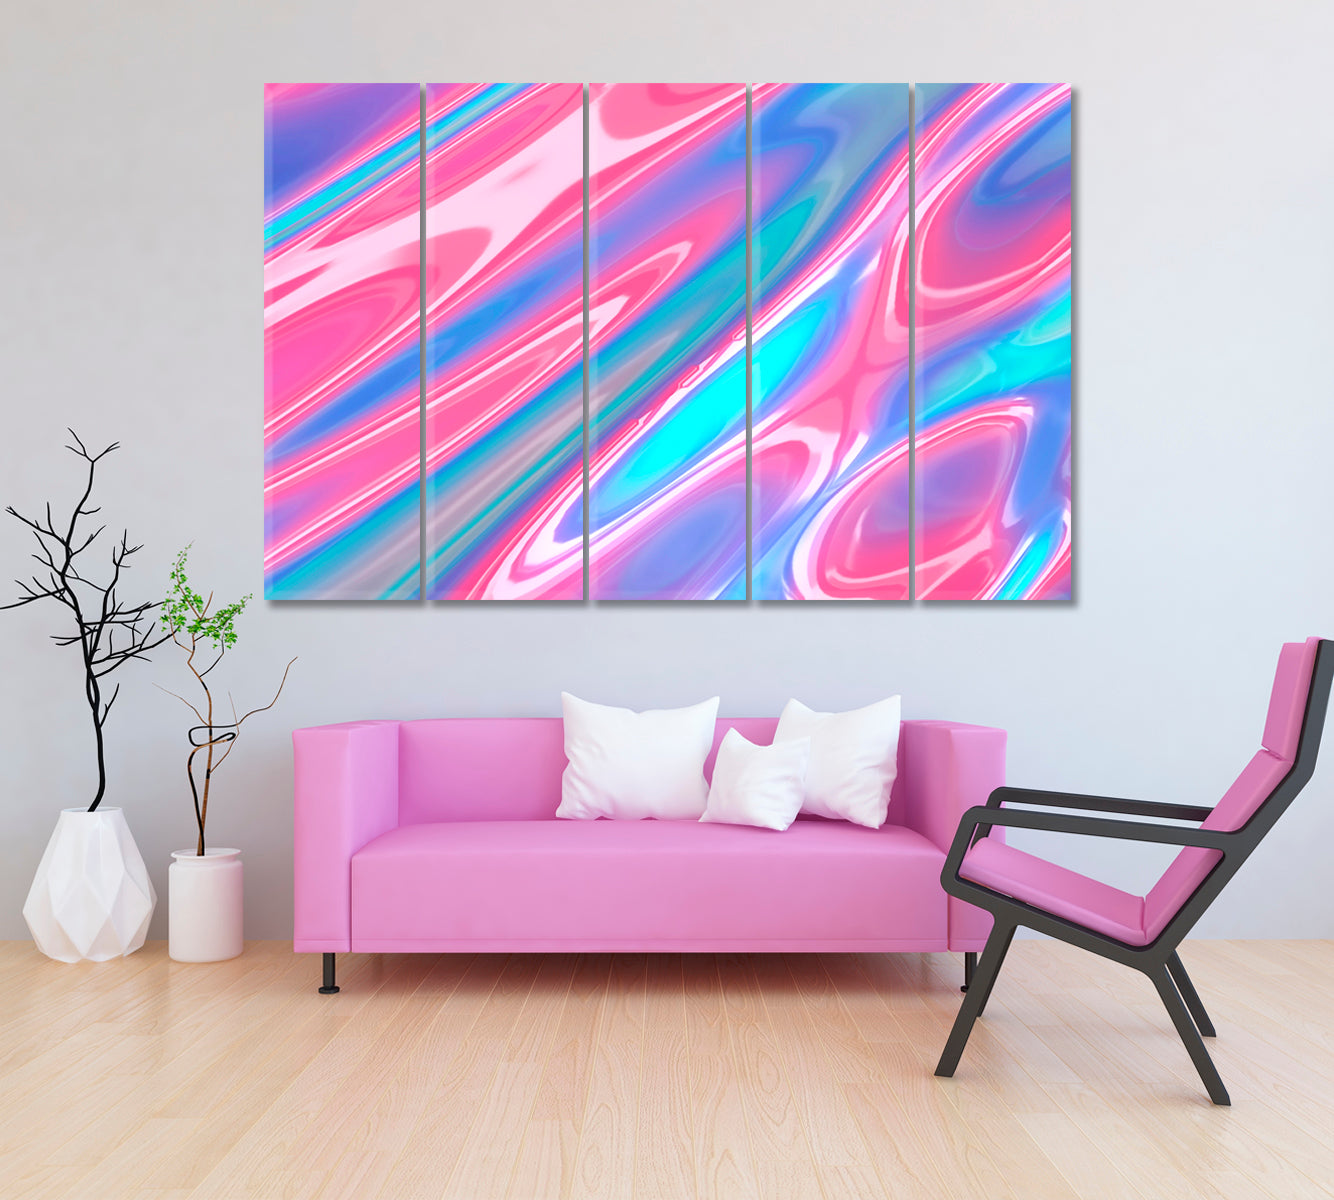 Abstract Colorful Liquid Weave Canvas Print ArtLexy 5 Panels 36"x24" inches 